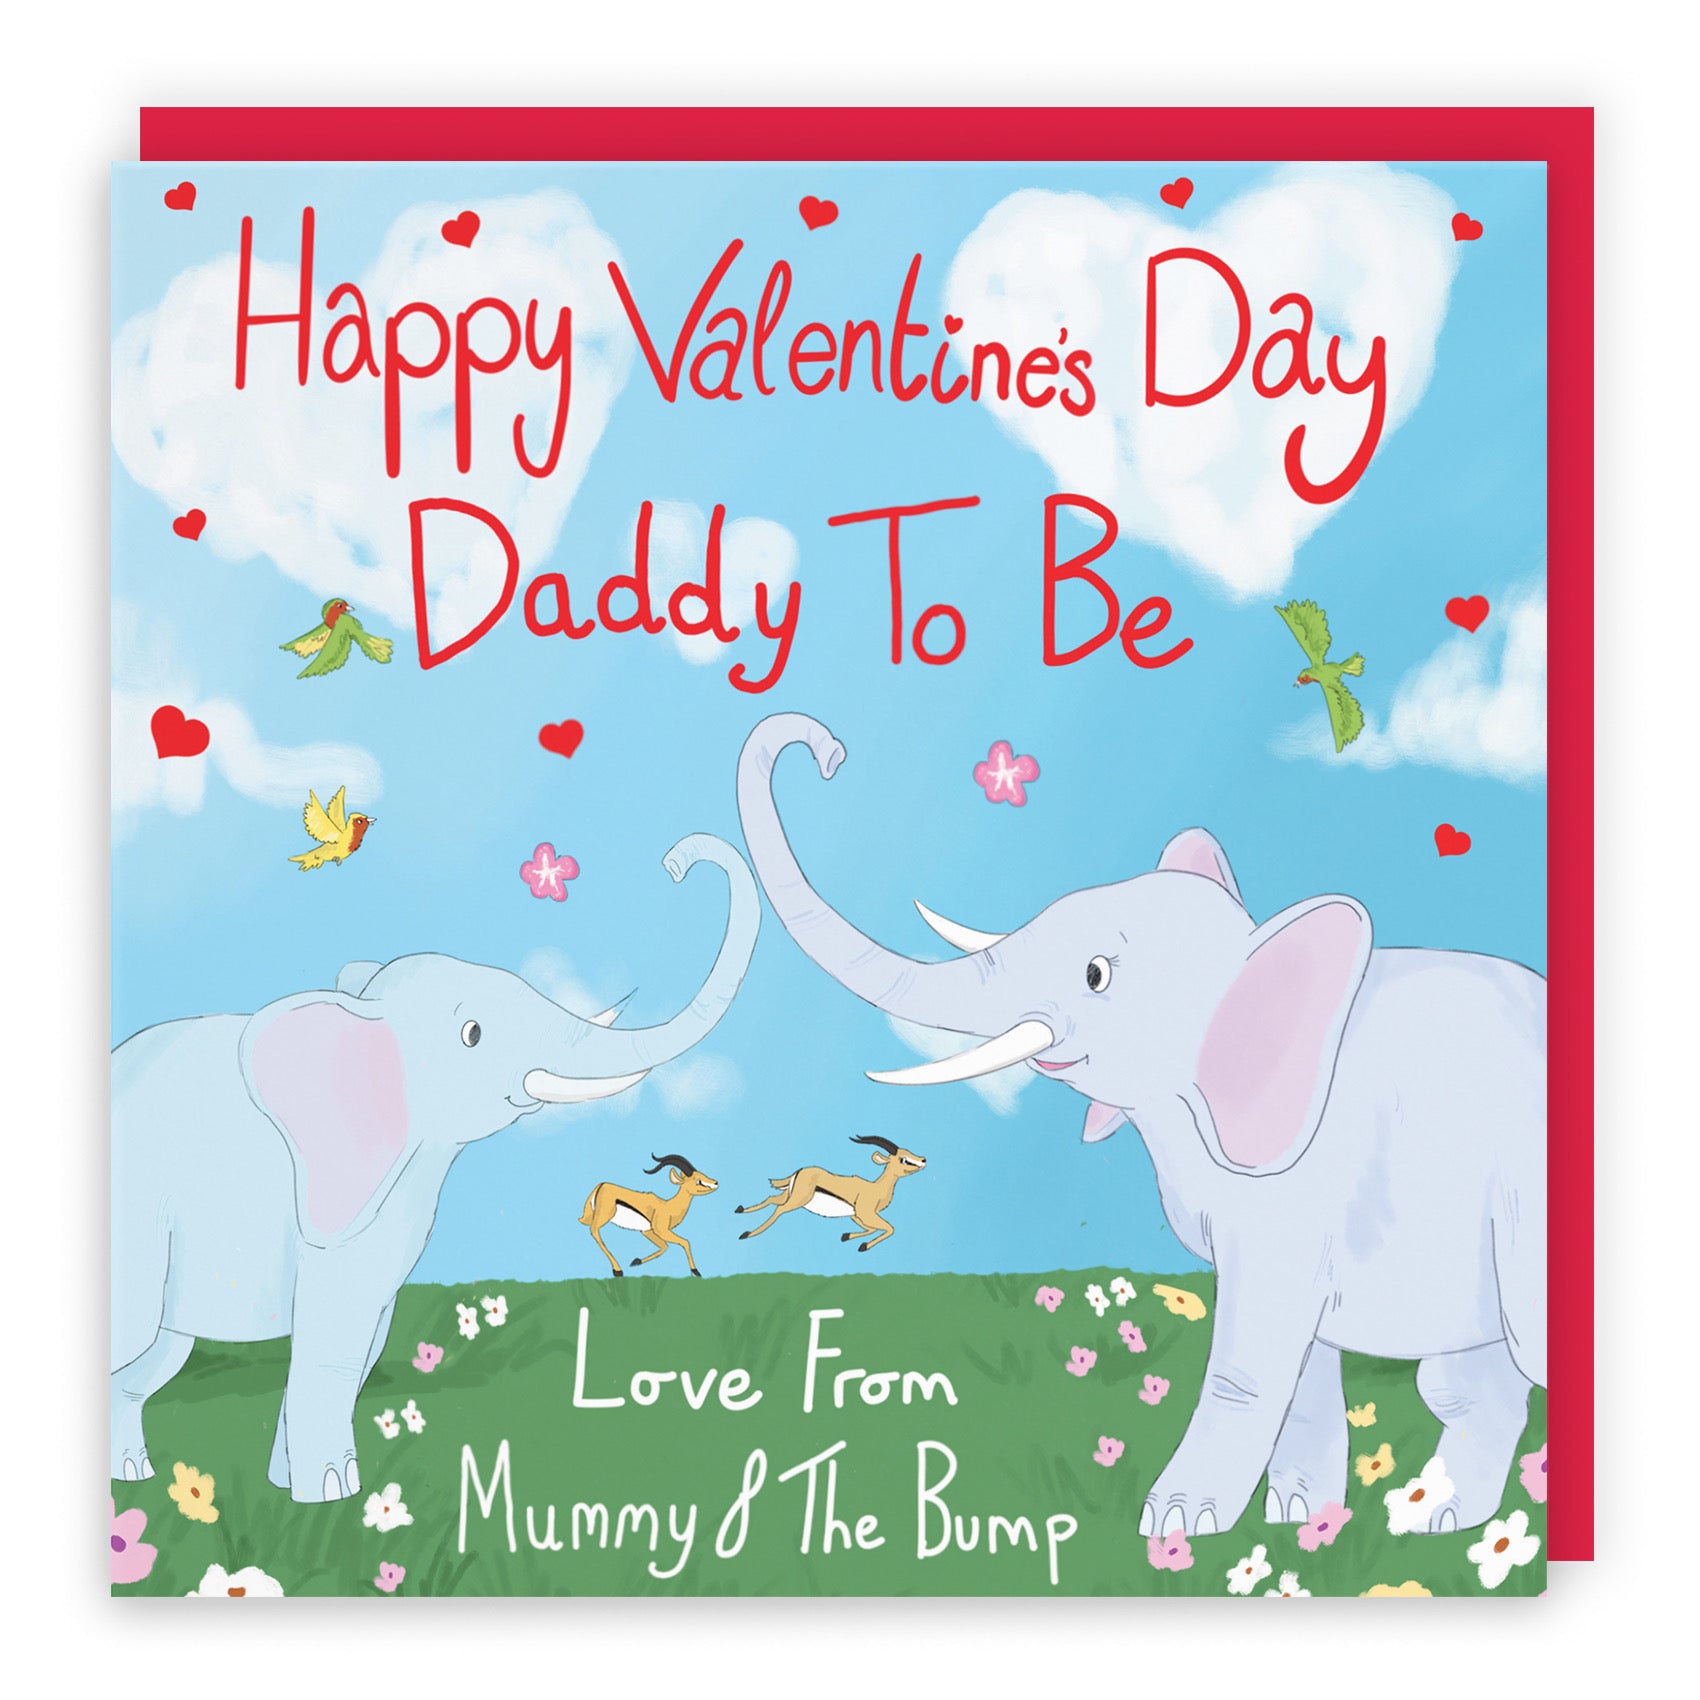 Daddy To Be Elephant From Bump Valentine's Day Card Cute Animals - Default Title (B09R6C1MRJ)